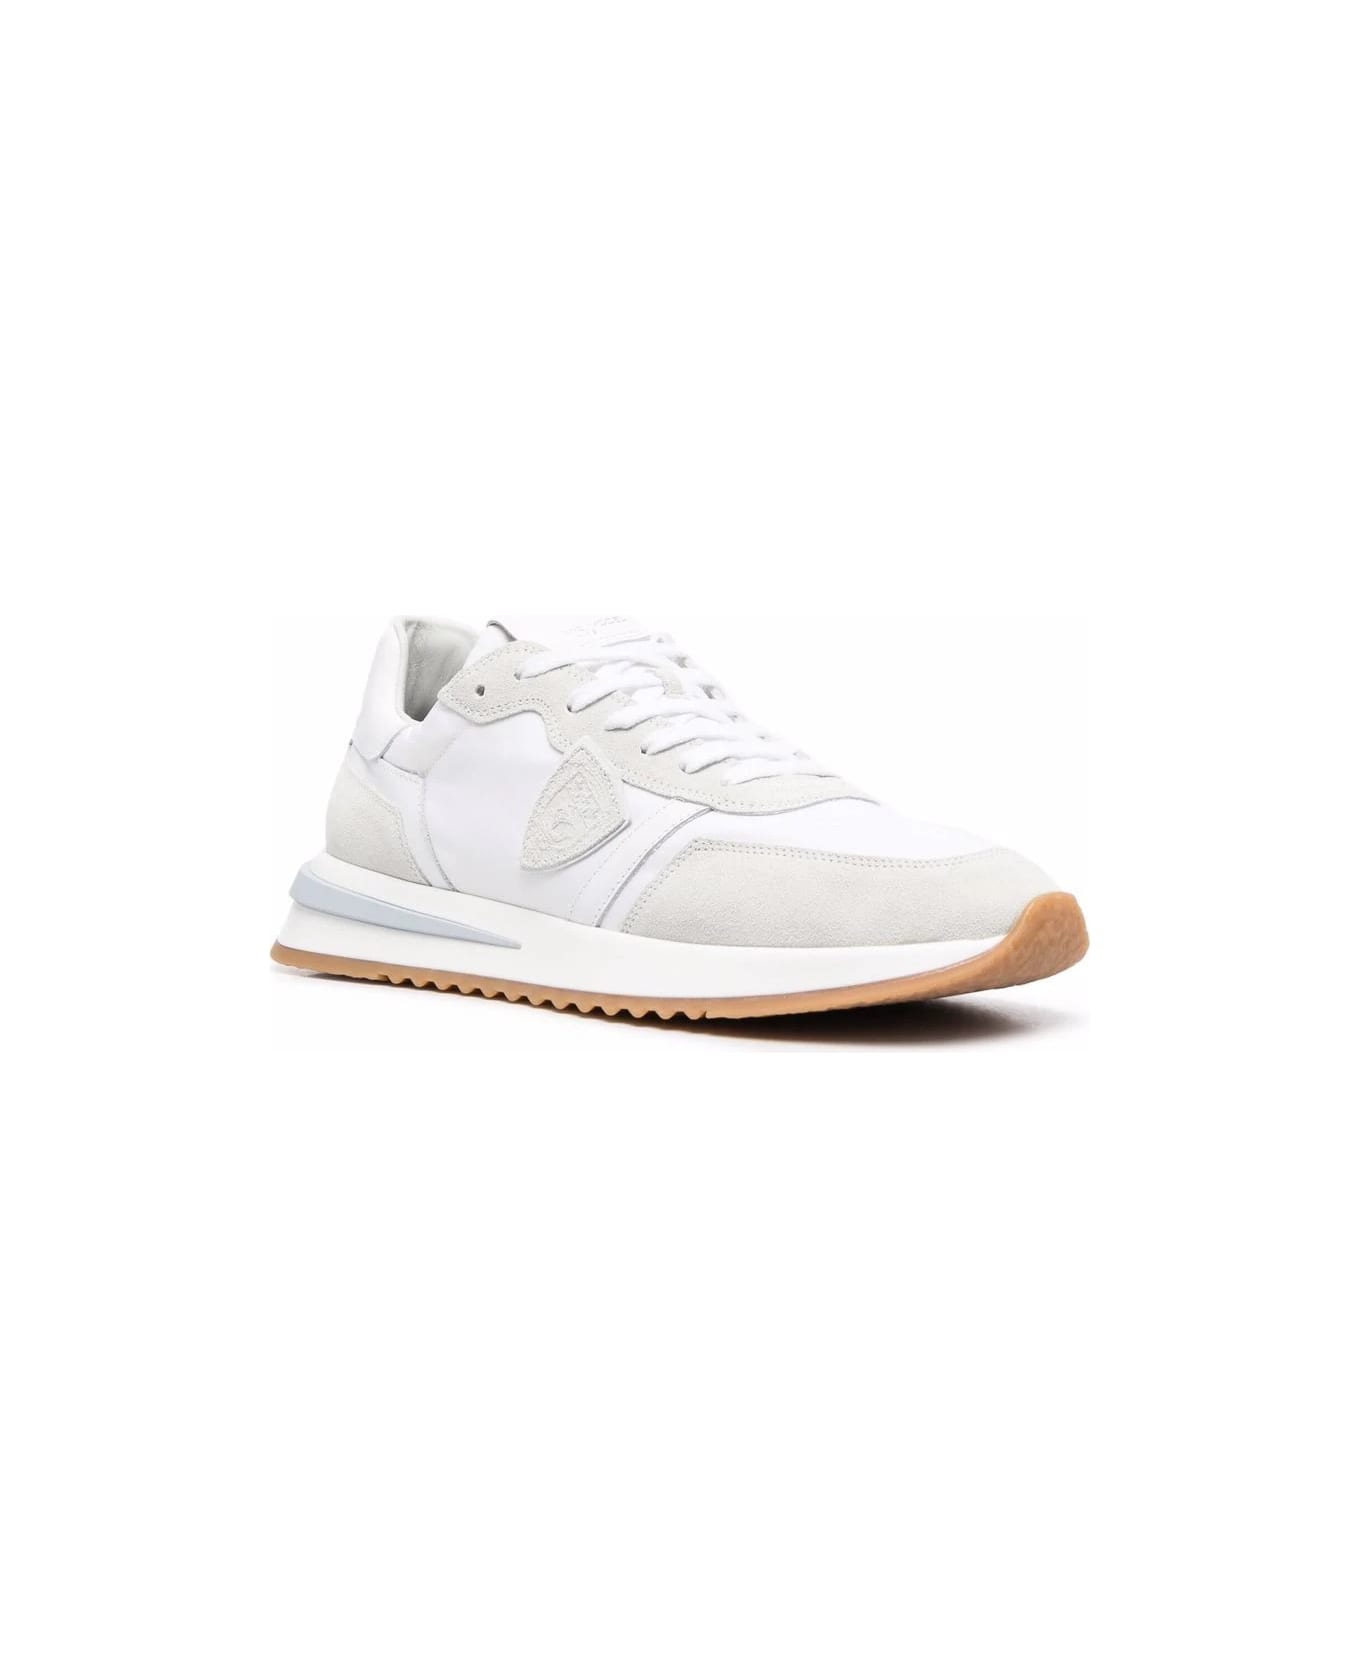 Philippe Model Tropez 2.1 Low Sneakers - White - White スニーカー